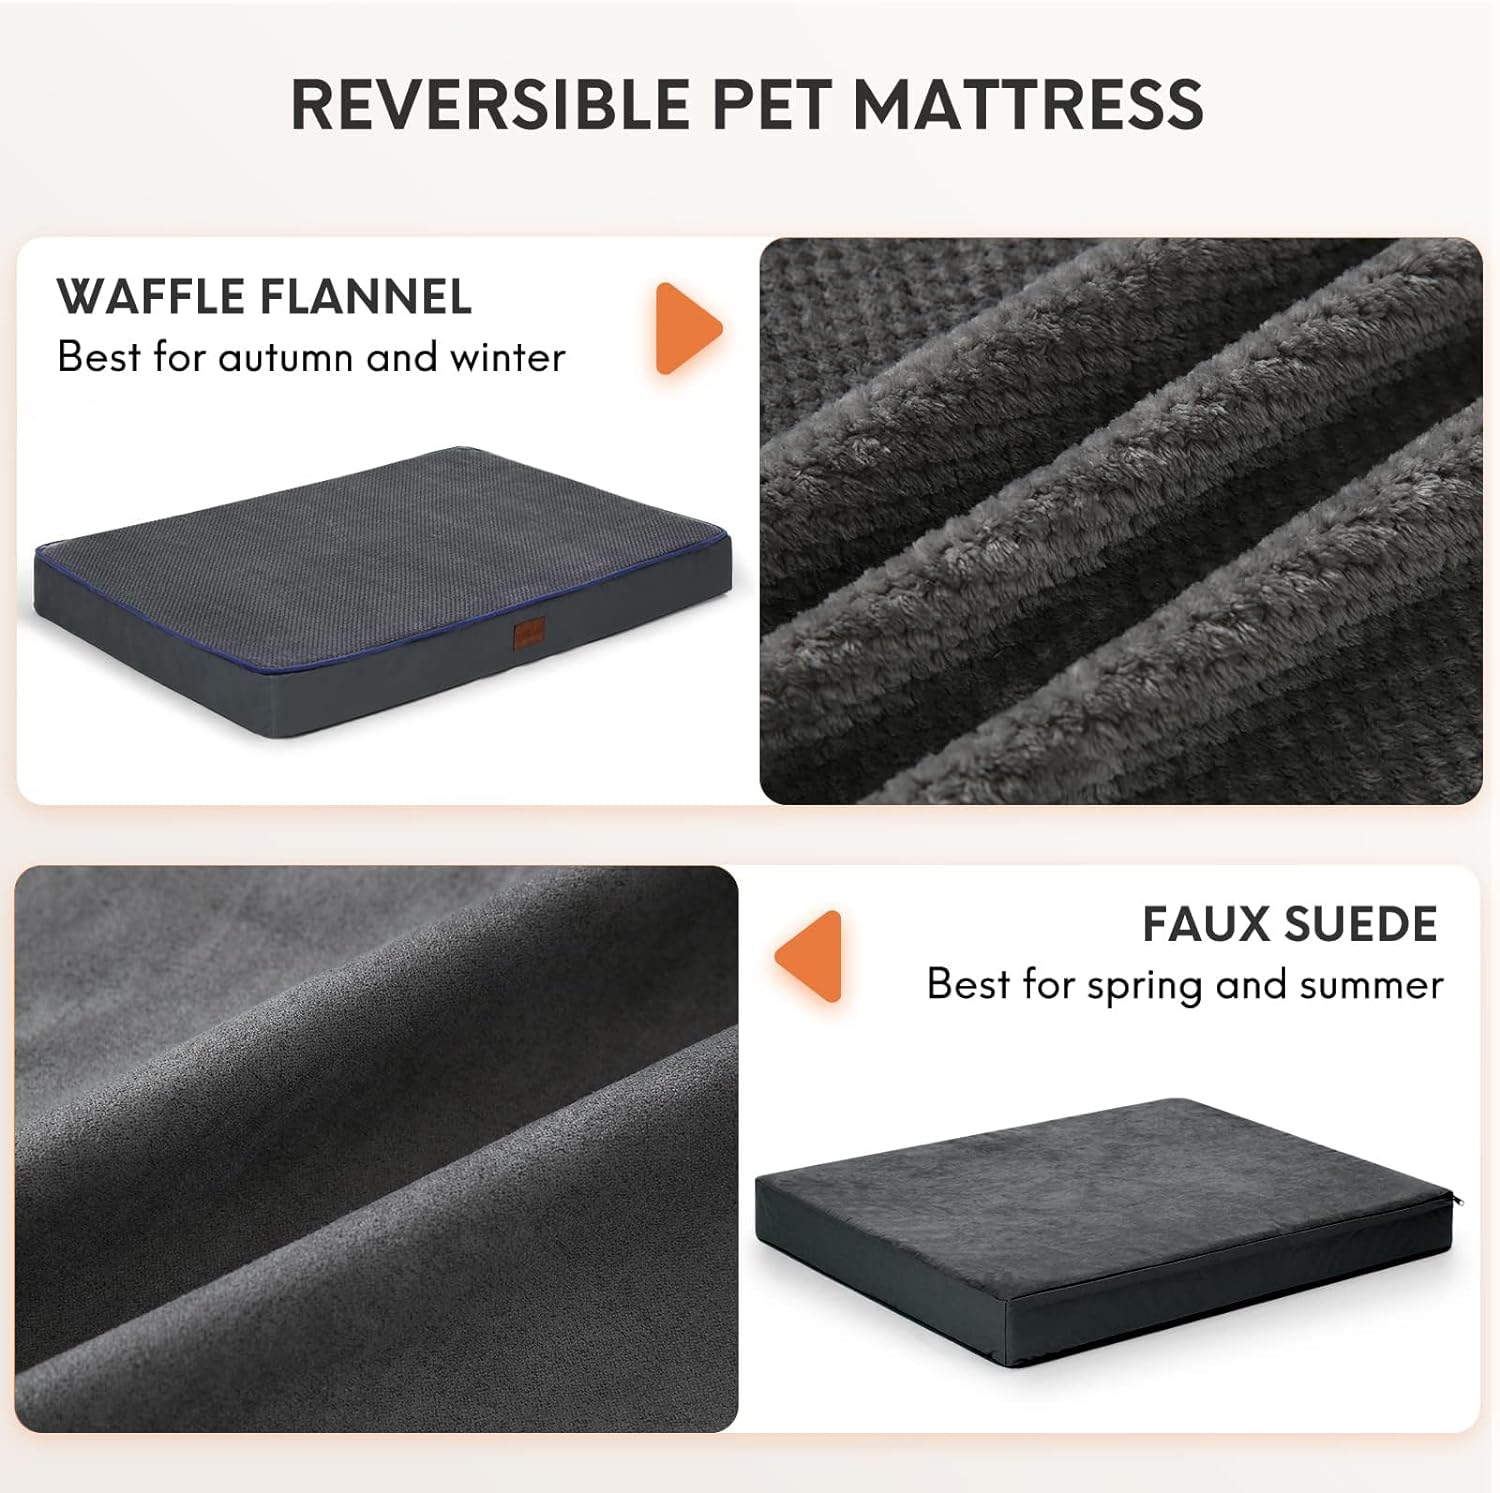 Bedfolks 3 Thick Orthopedic Dog Bed for Medium Dogs, Memory Foam Dog Bed with Lining and Removable Cover, Reversible Washable Dog Mattress for Crate, Dark Grey